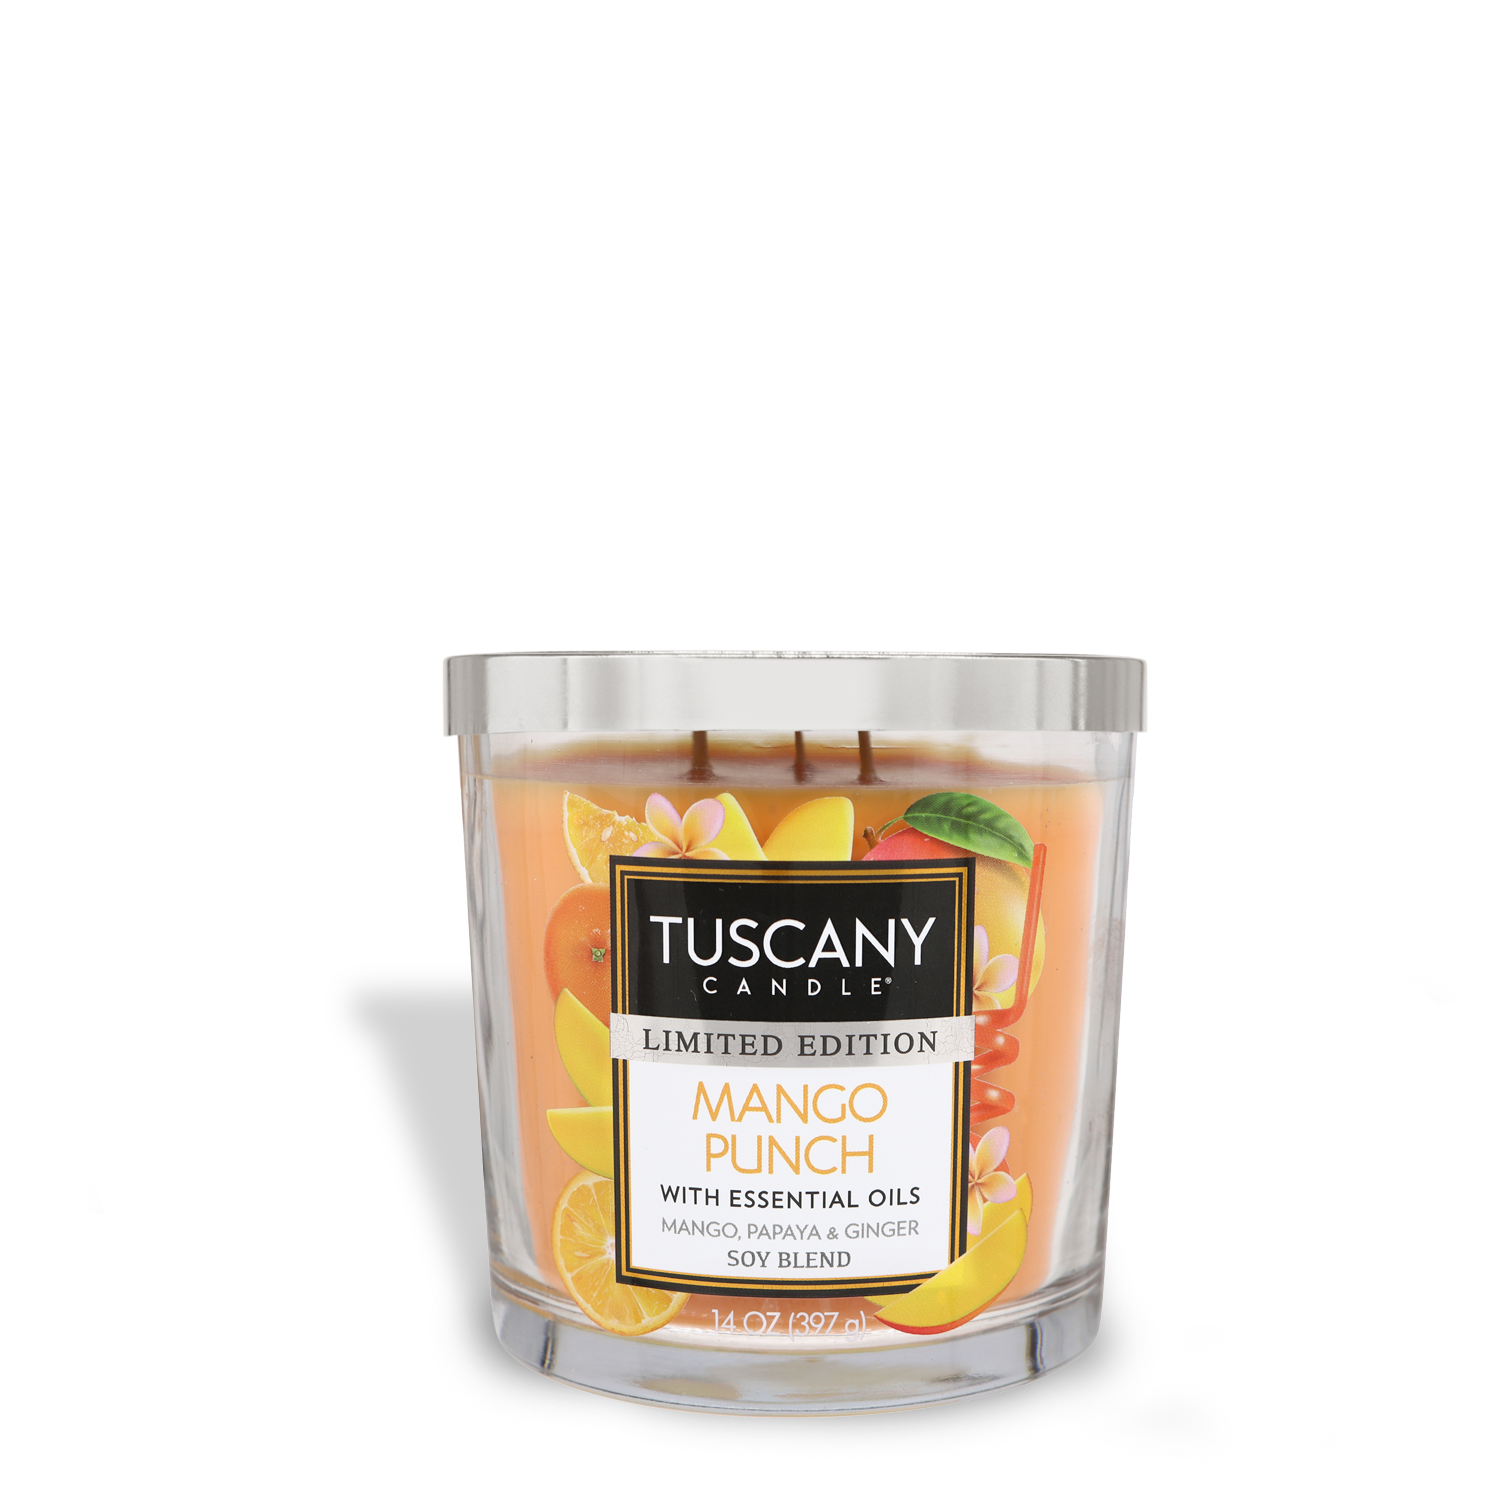 Scented candle in a glass jar with a "Mango Punch Long-Lasting Scented Jar Candle (14 oz)" fragrance label from Tuscany Candle® SEASONAL.